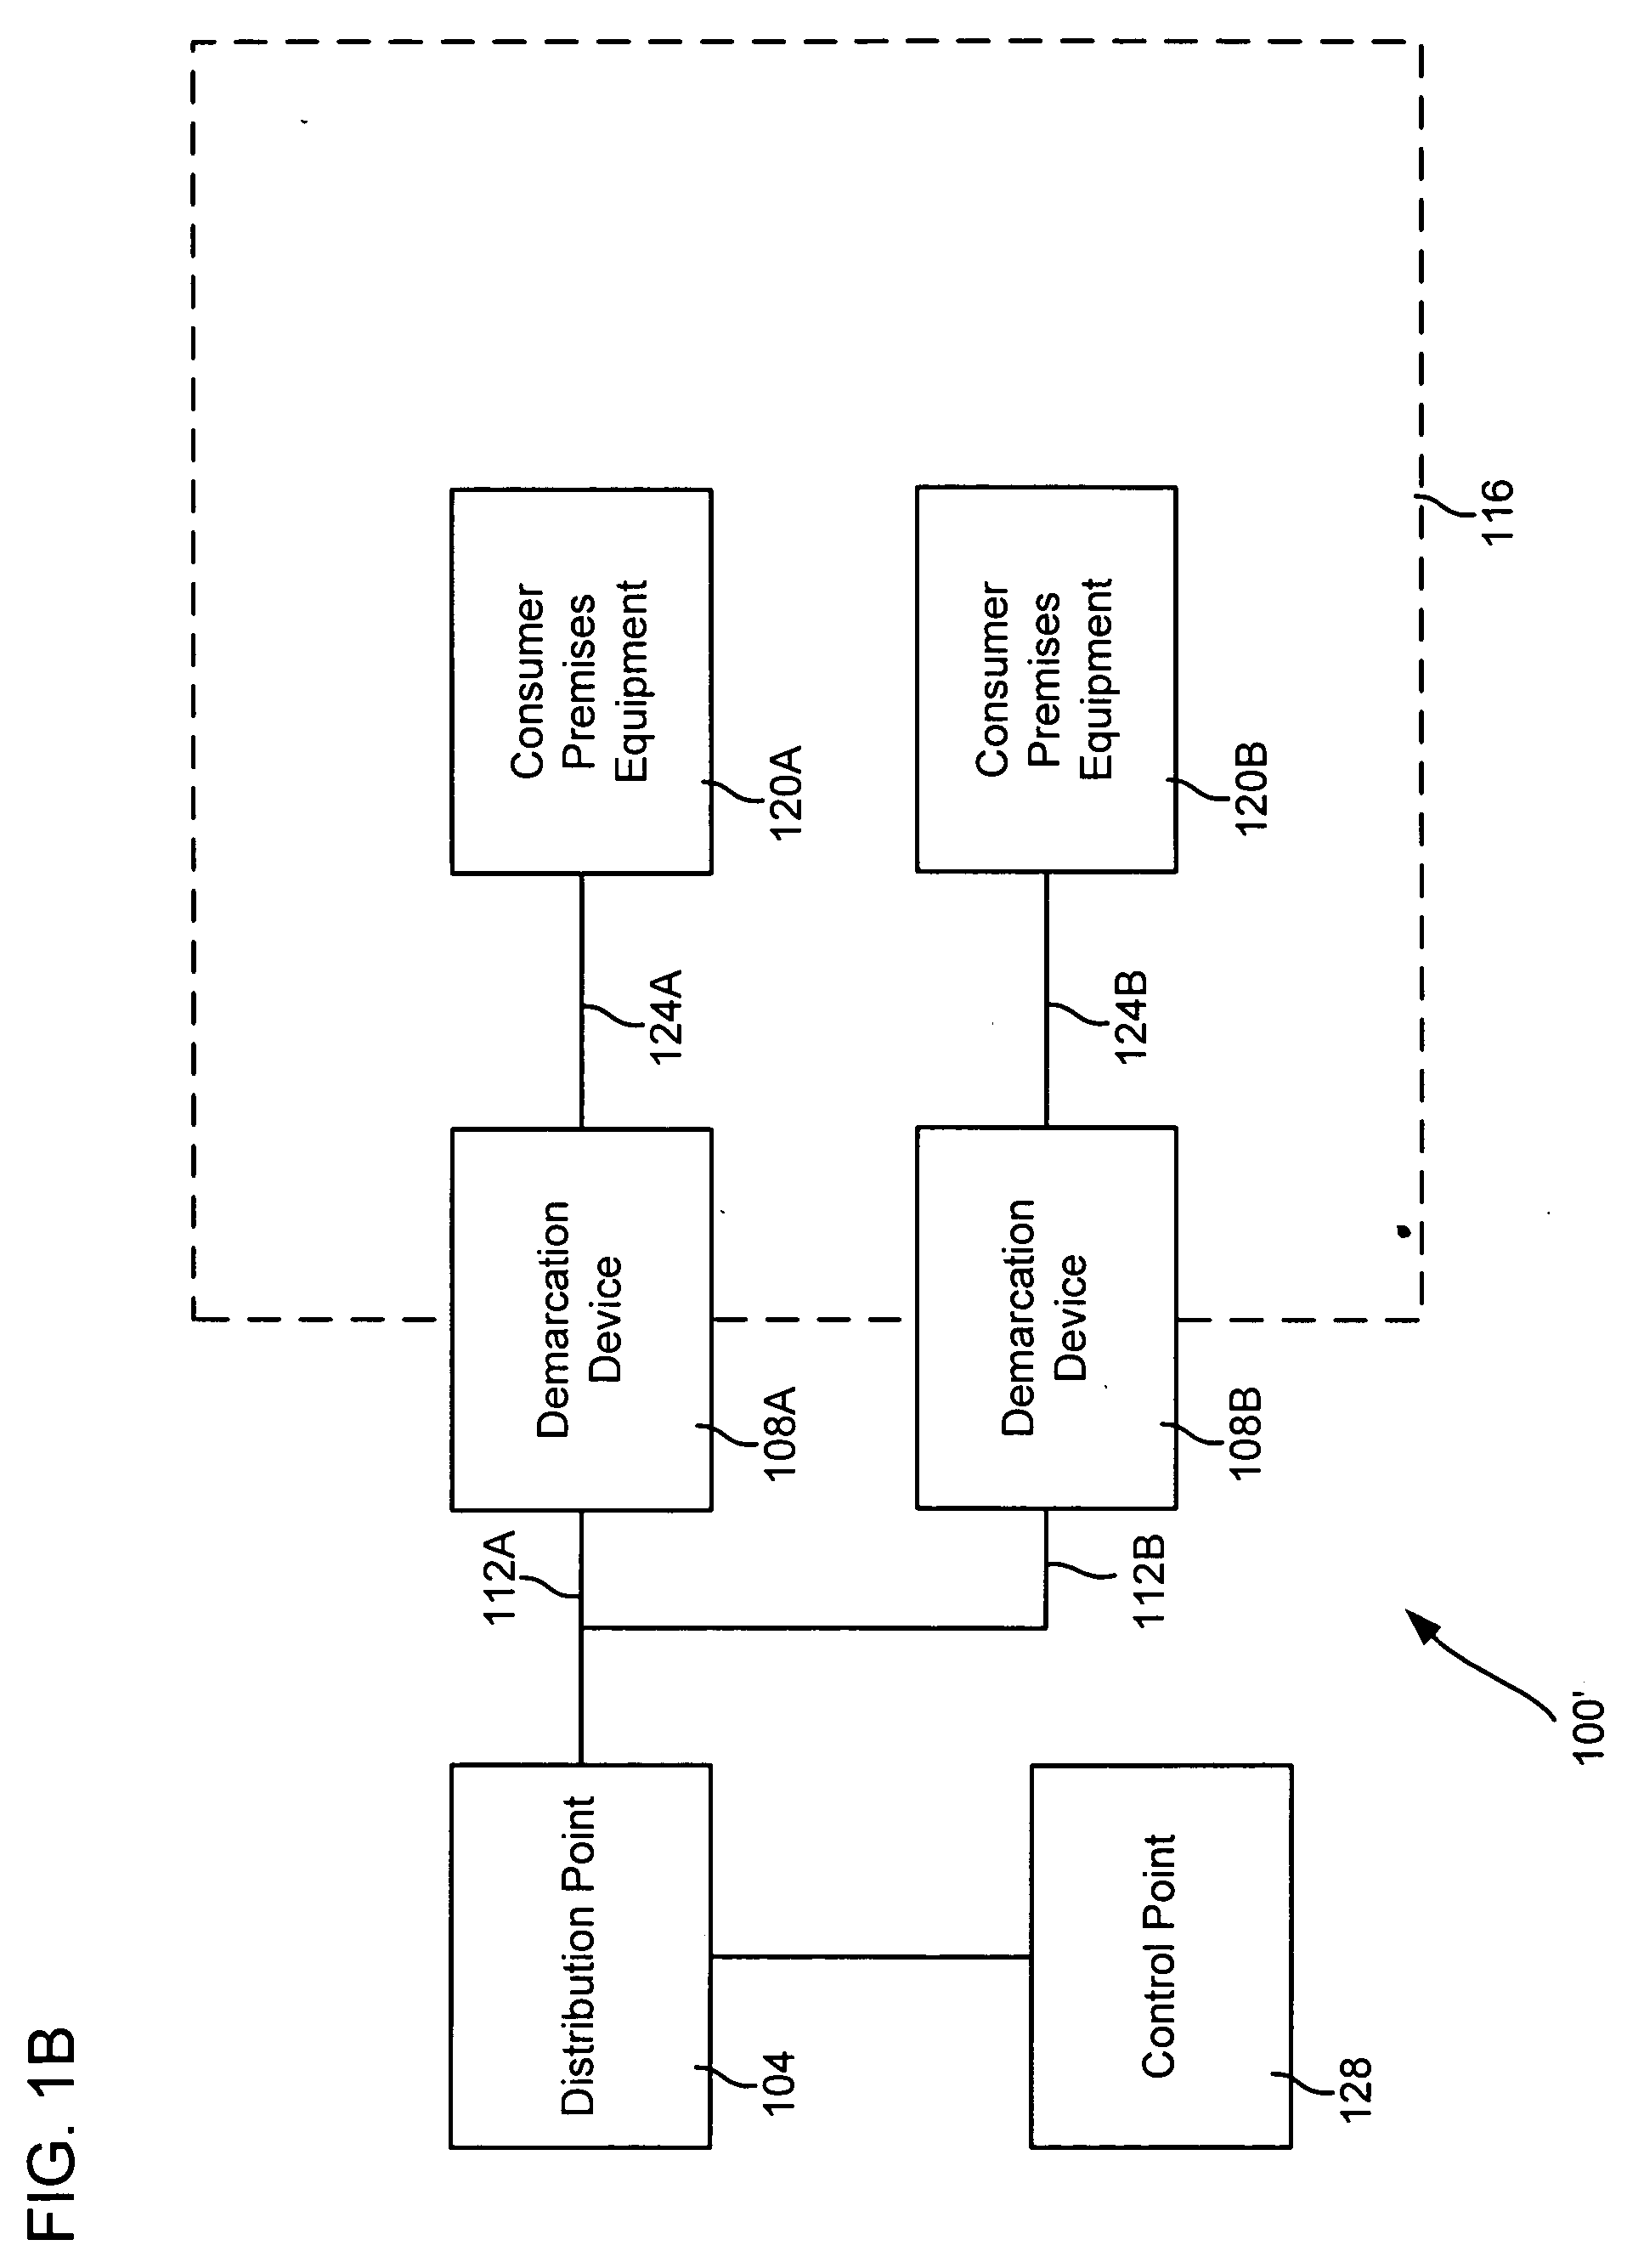 Methods, systems and apparatus for providing video transmissions over multiple media